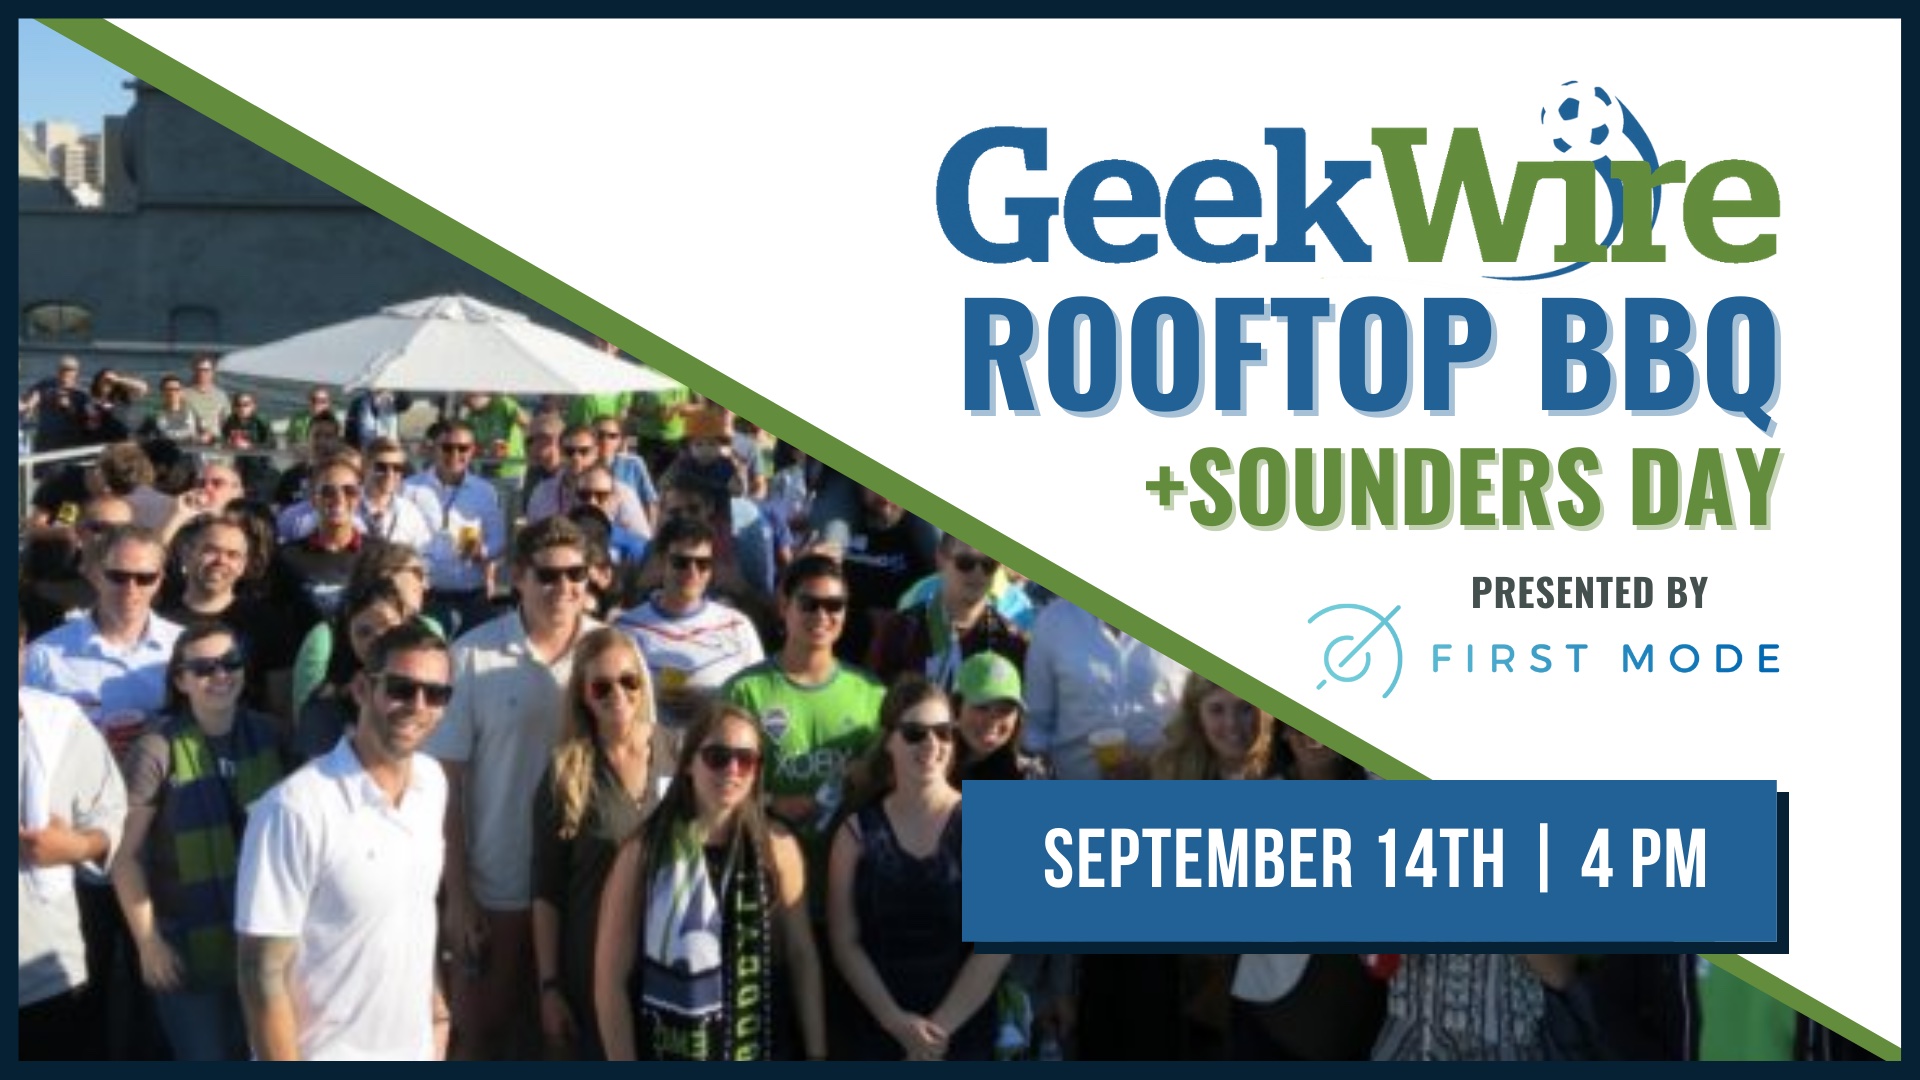 GeekWire’s rooftop BBQ and Sounders Day returns next week: Last chance to grab tickets